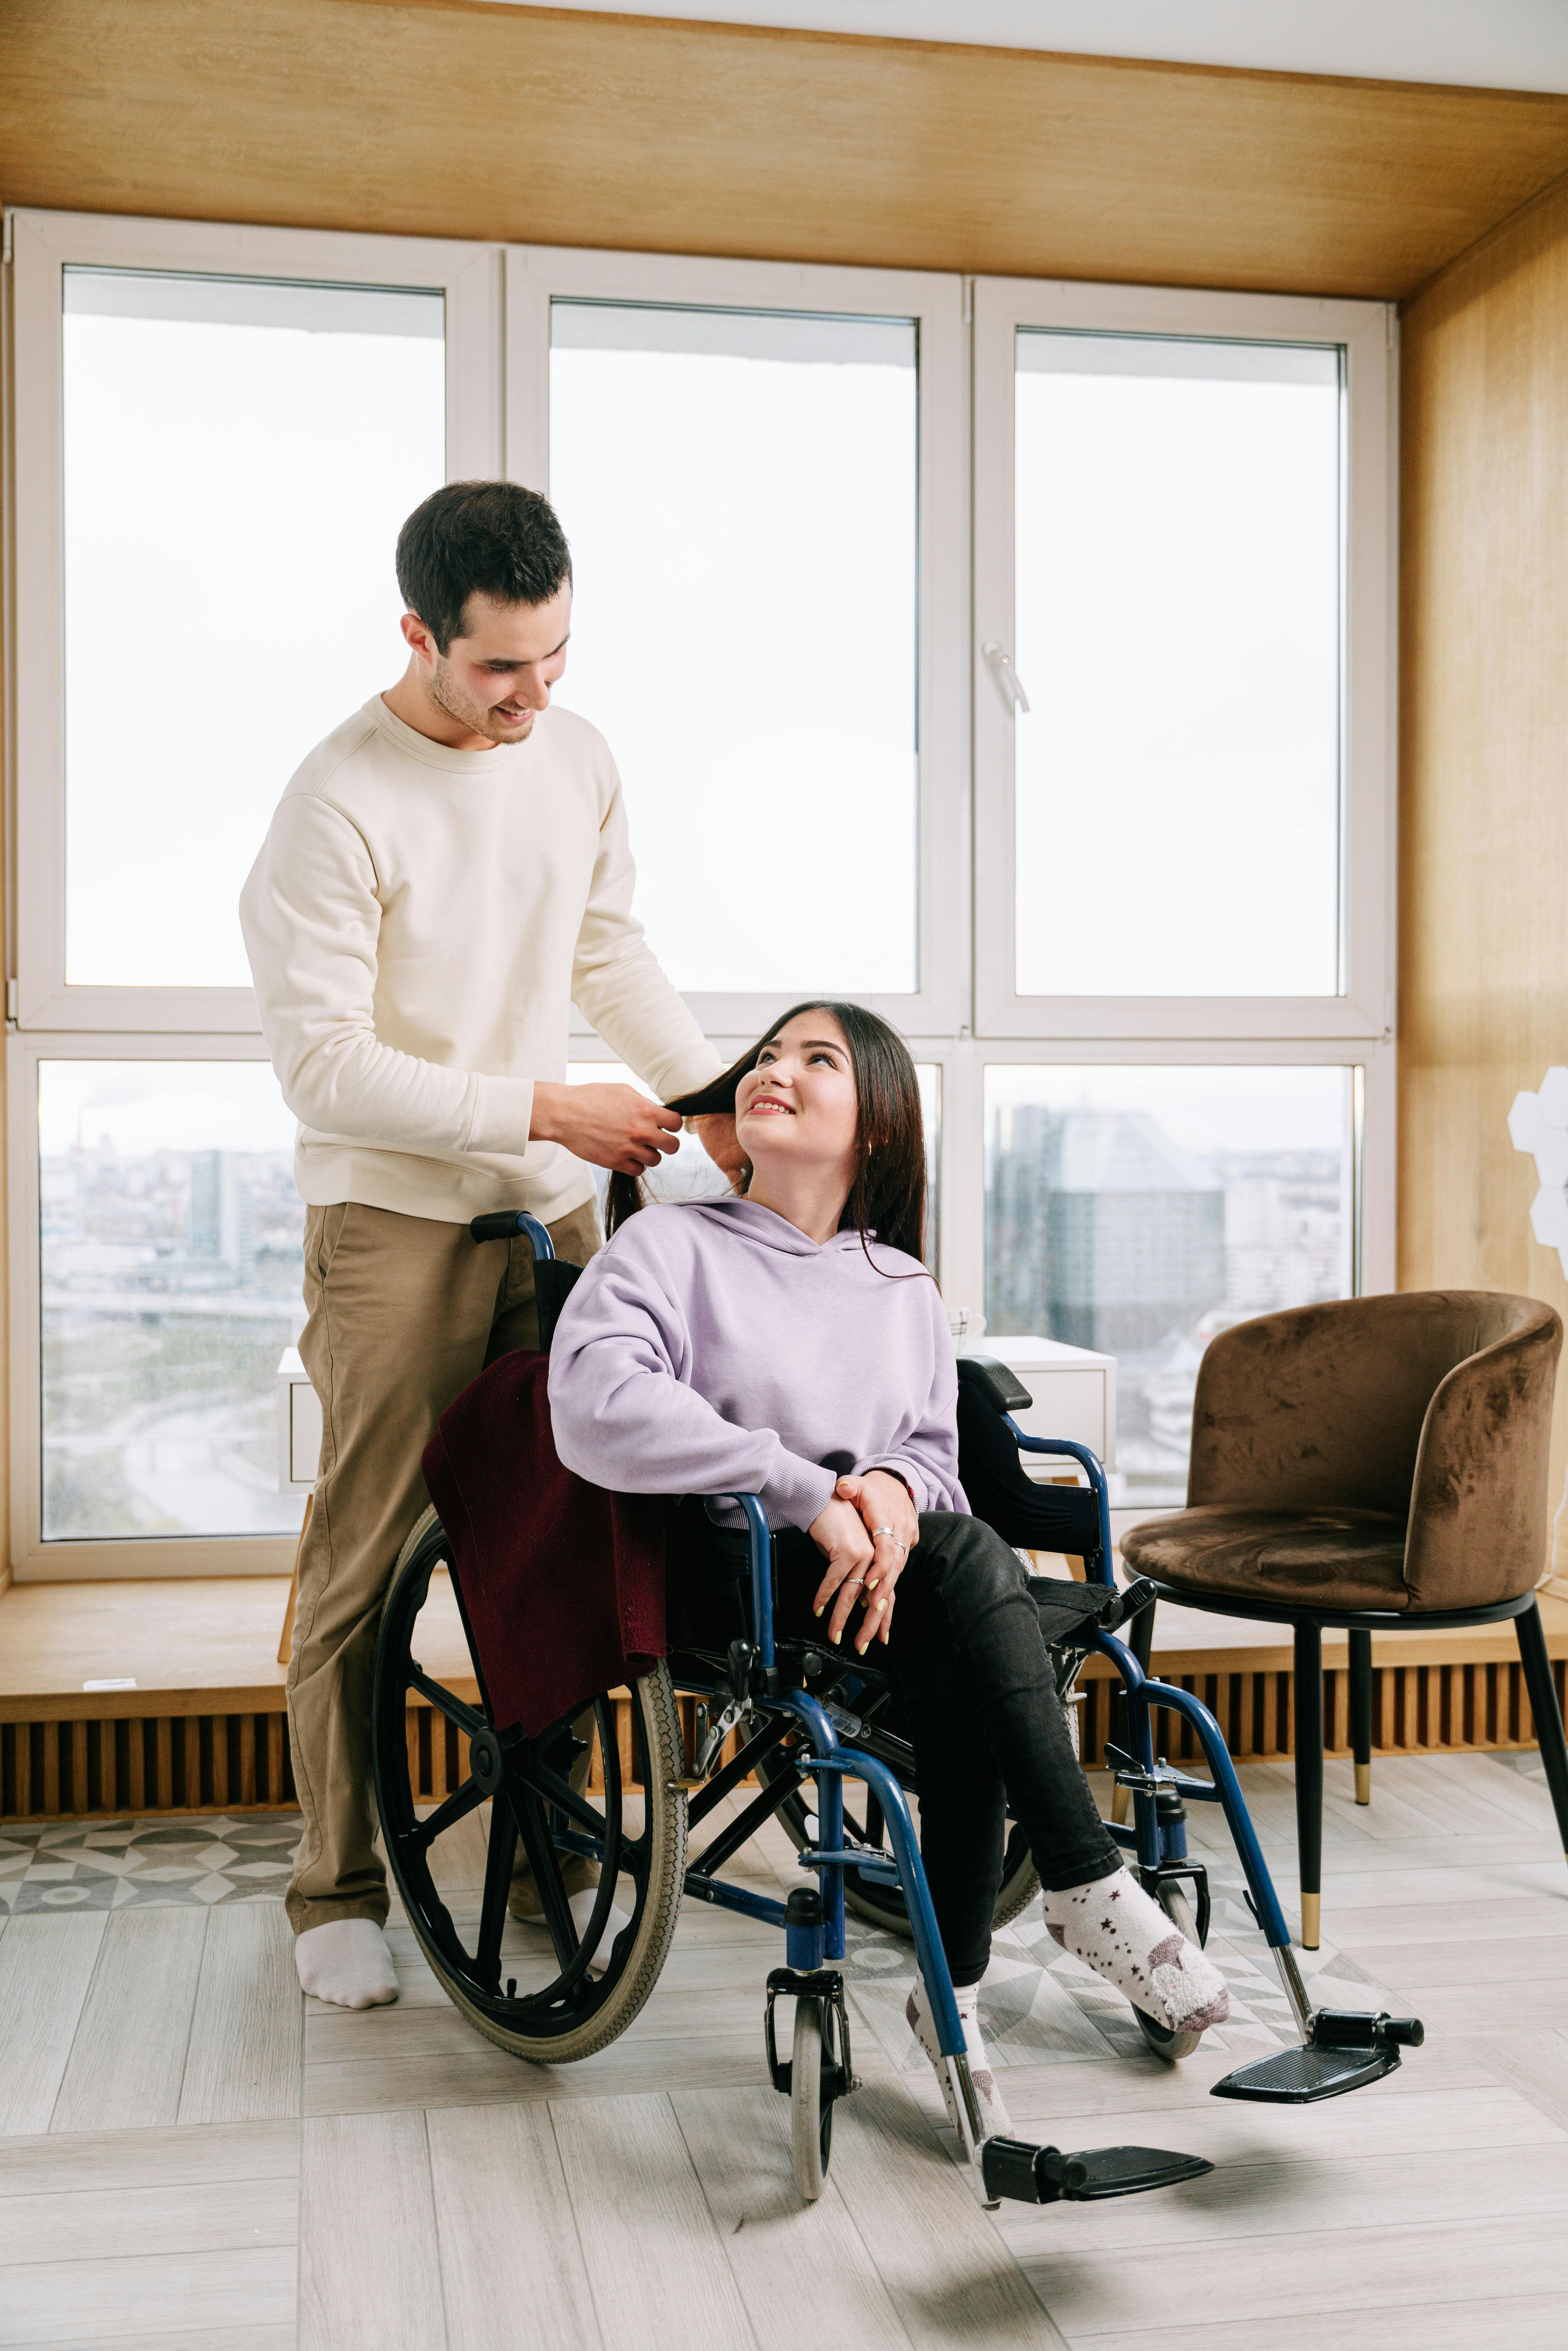 Man Touching the Hair of the Woman in Wheelchair · Free Stock Photo